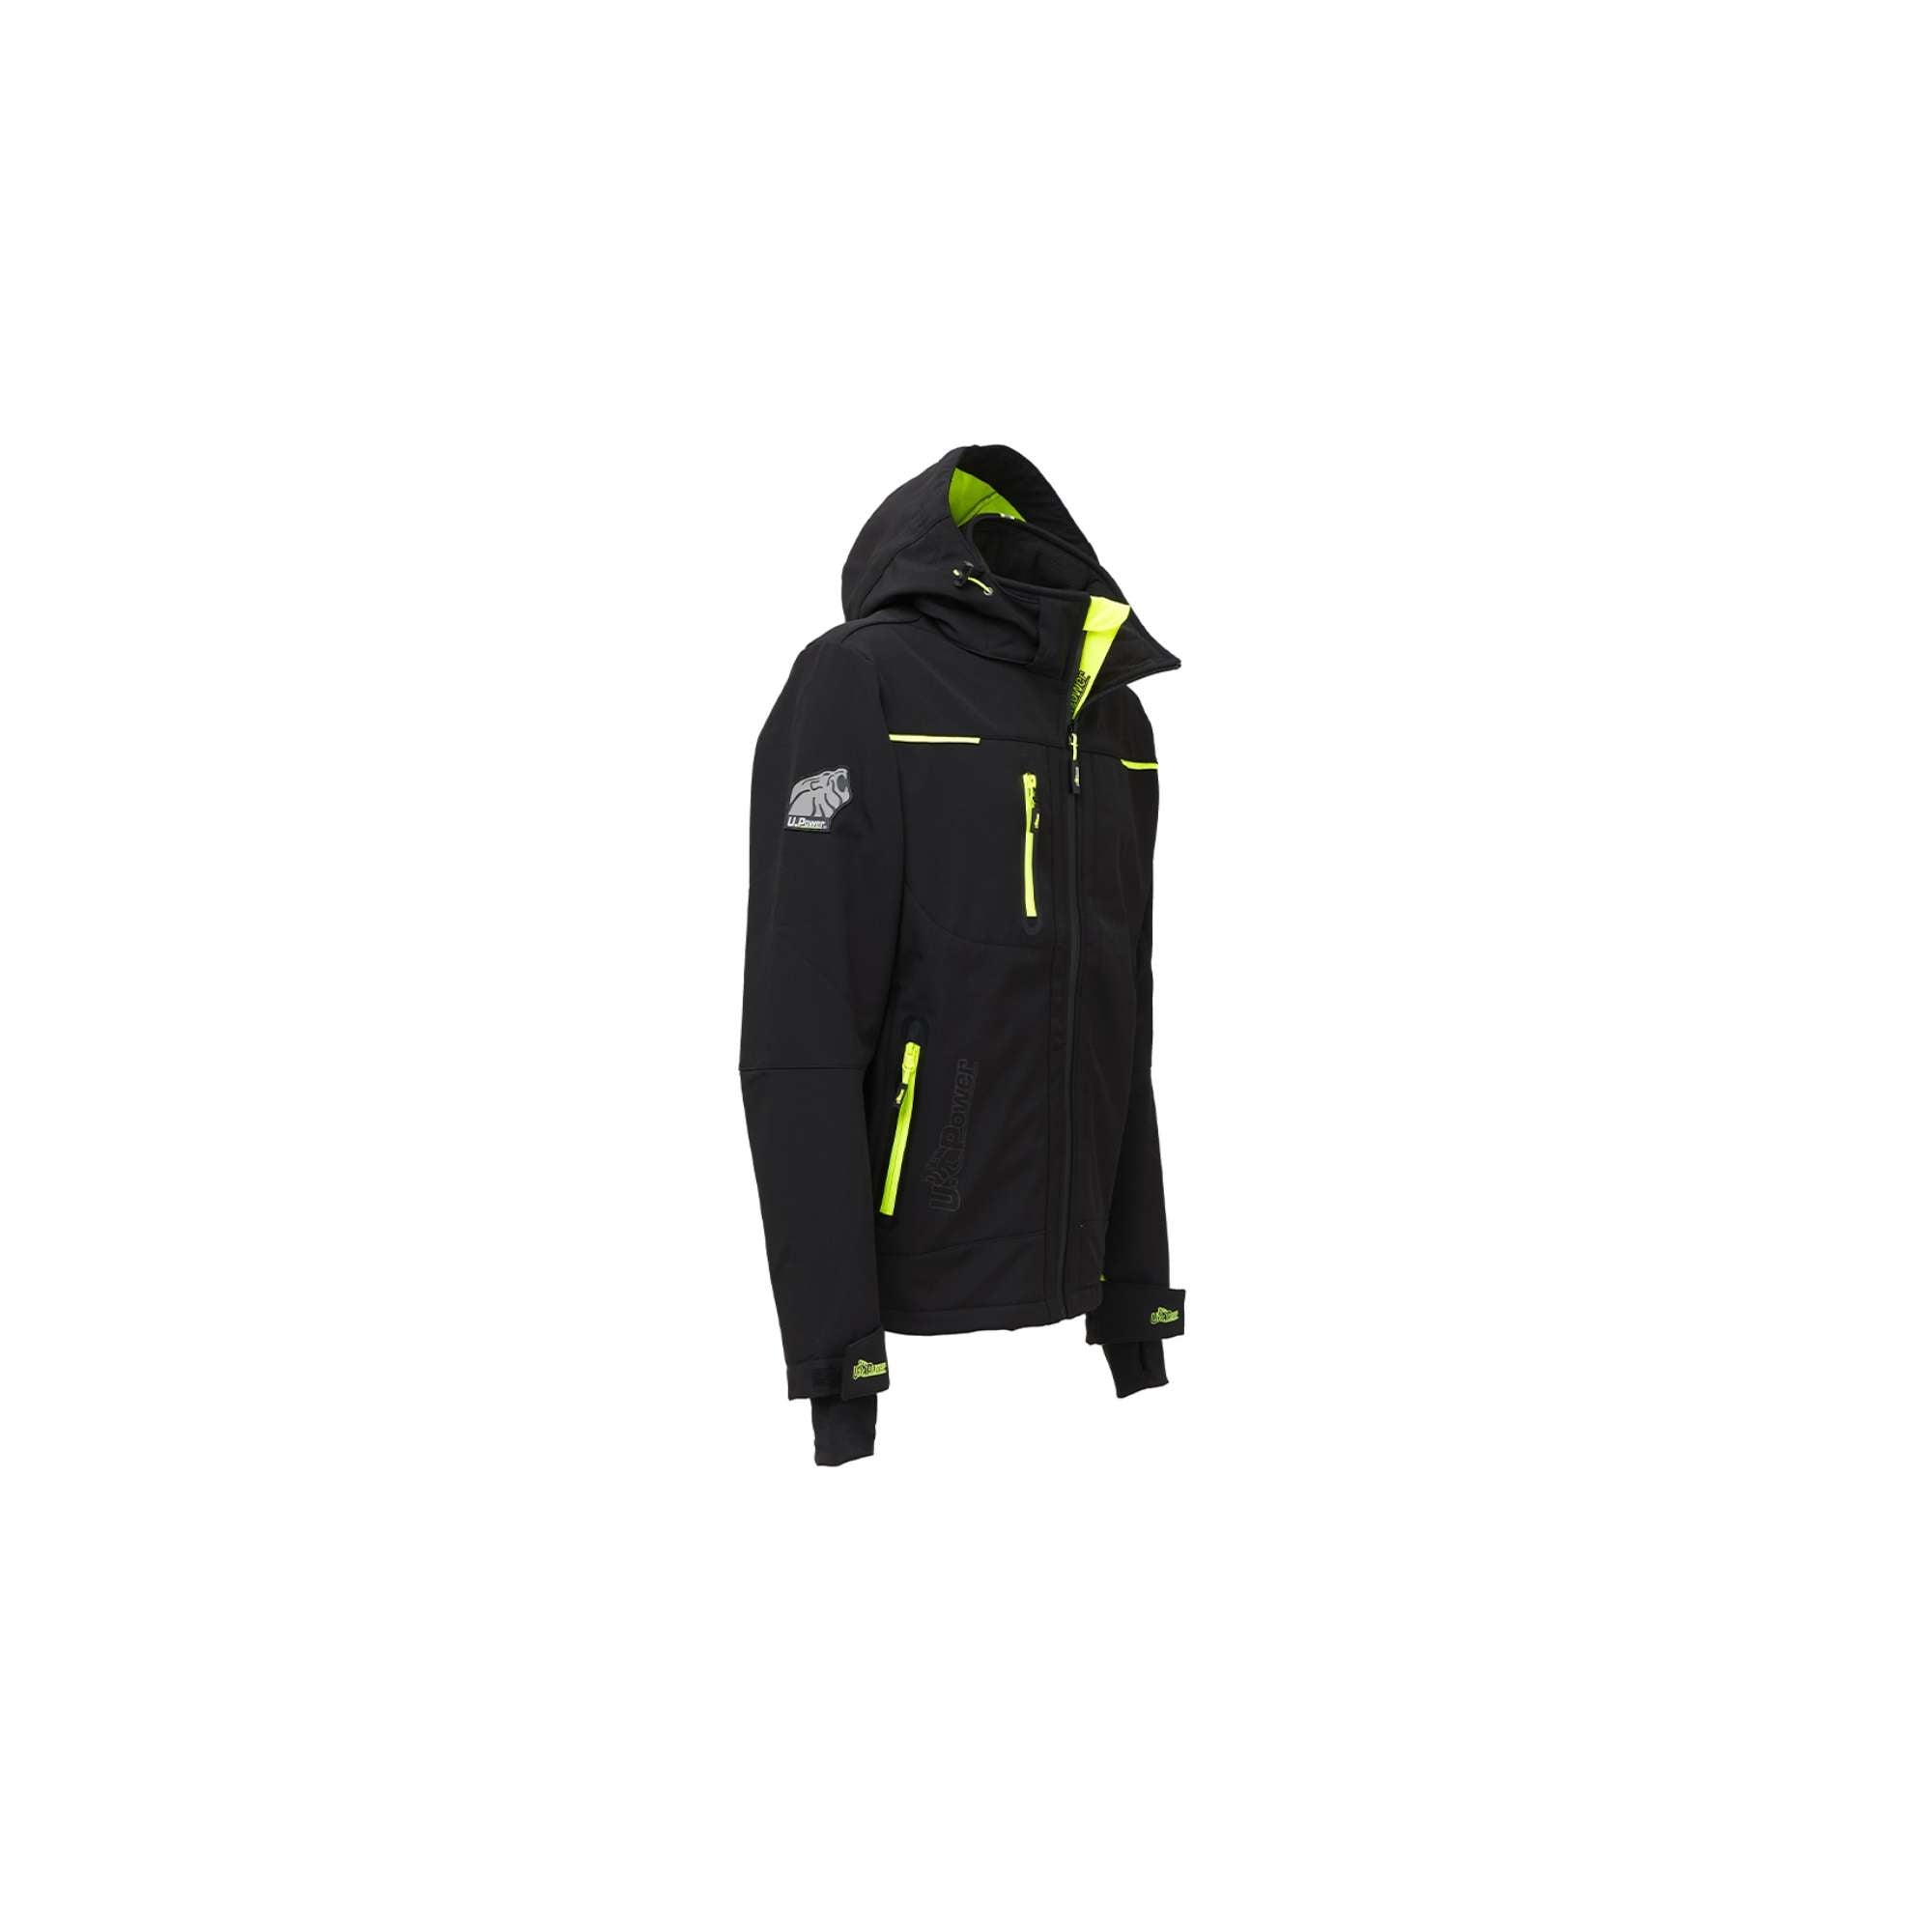 Giacca impermeabile Space in Softshell colore black carbon - U-Power FU187BC